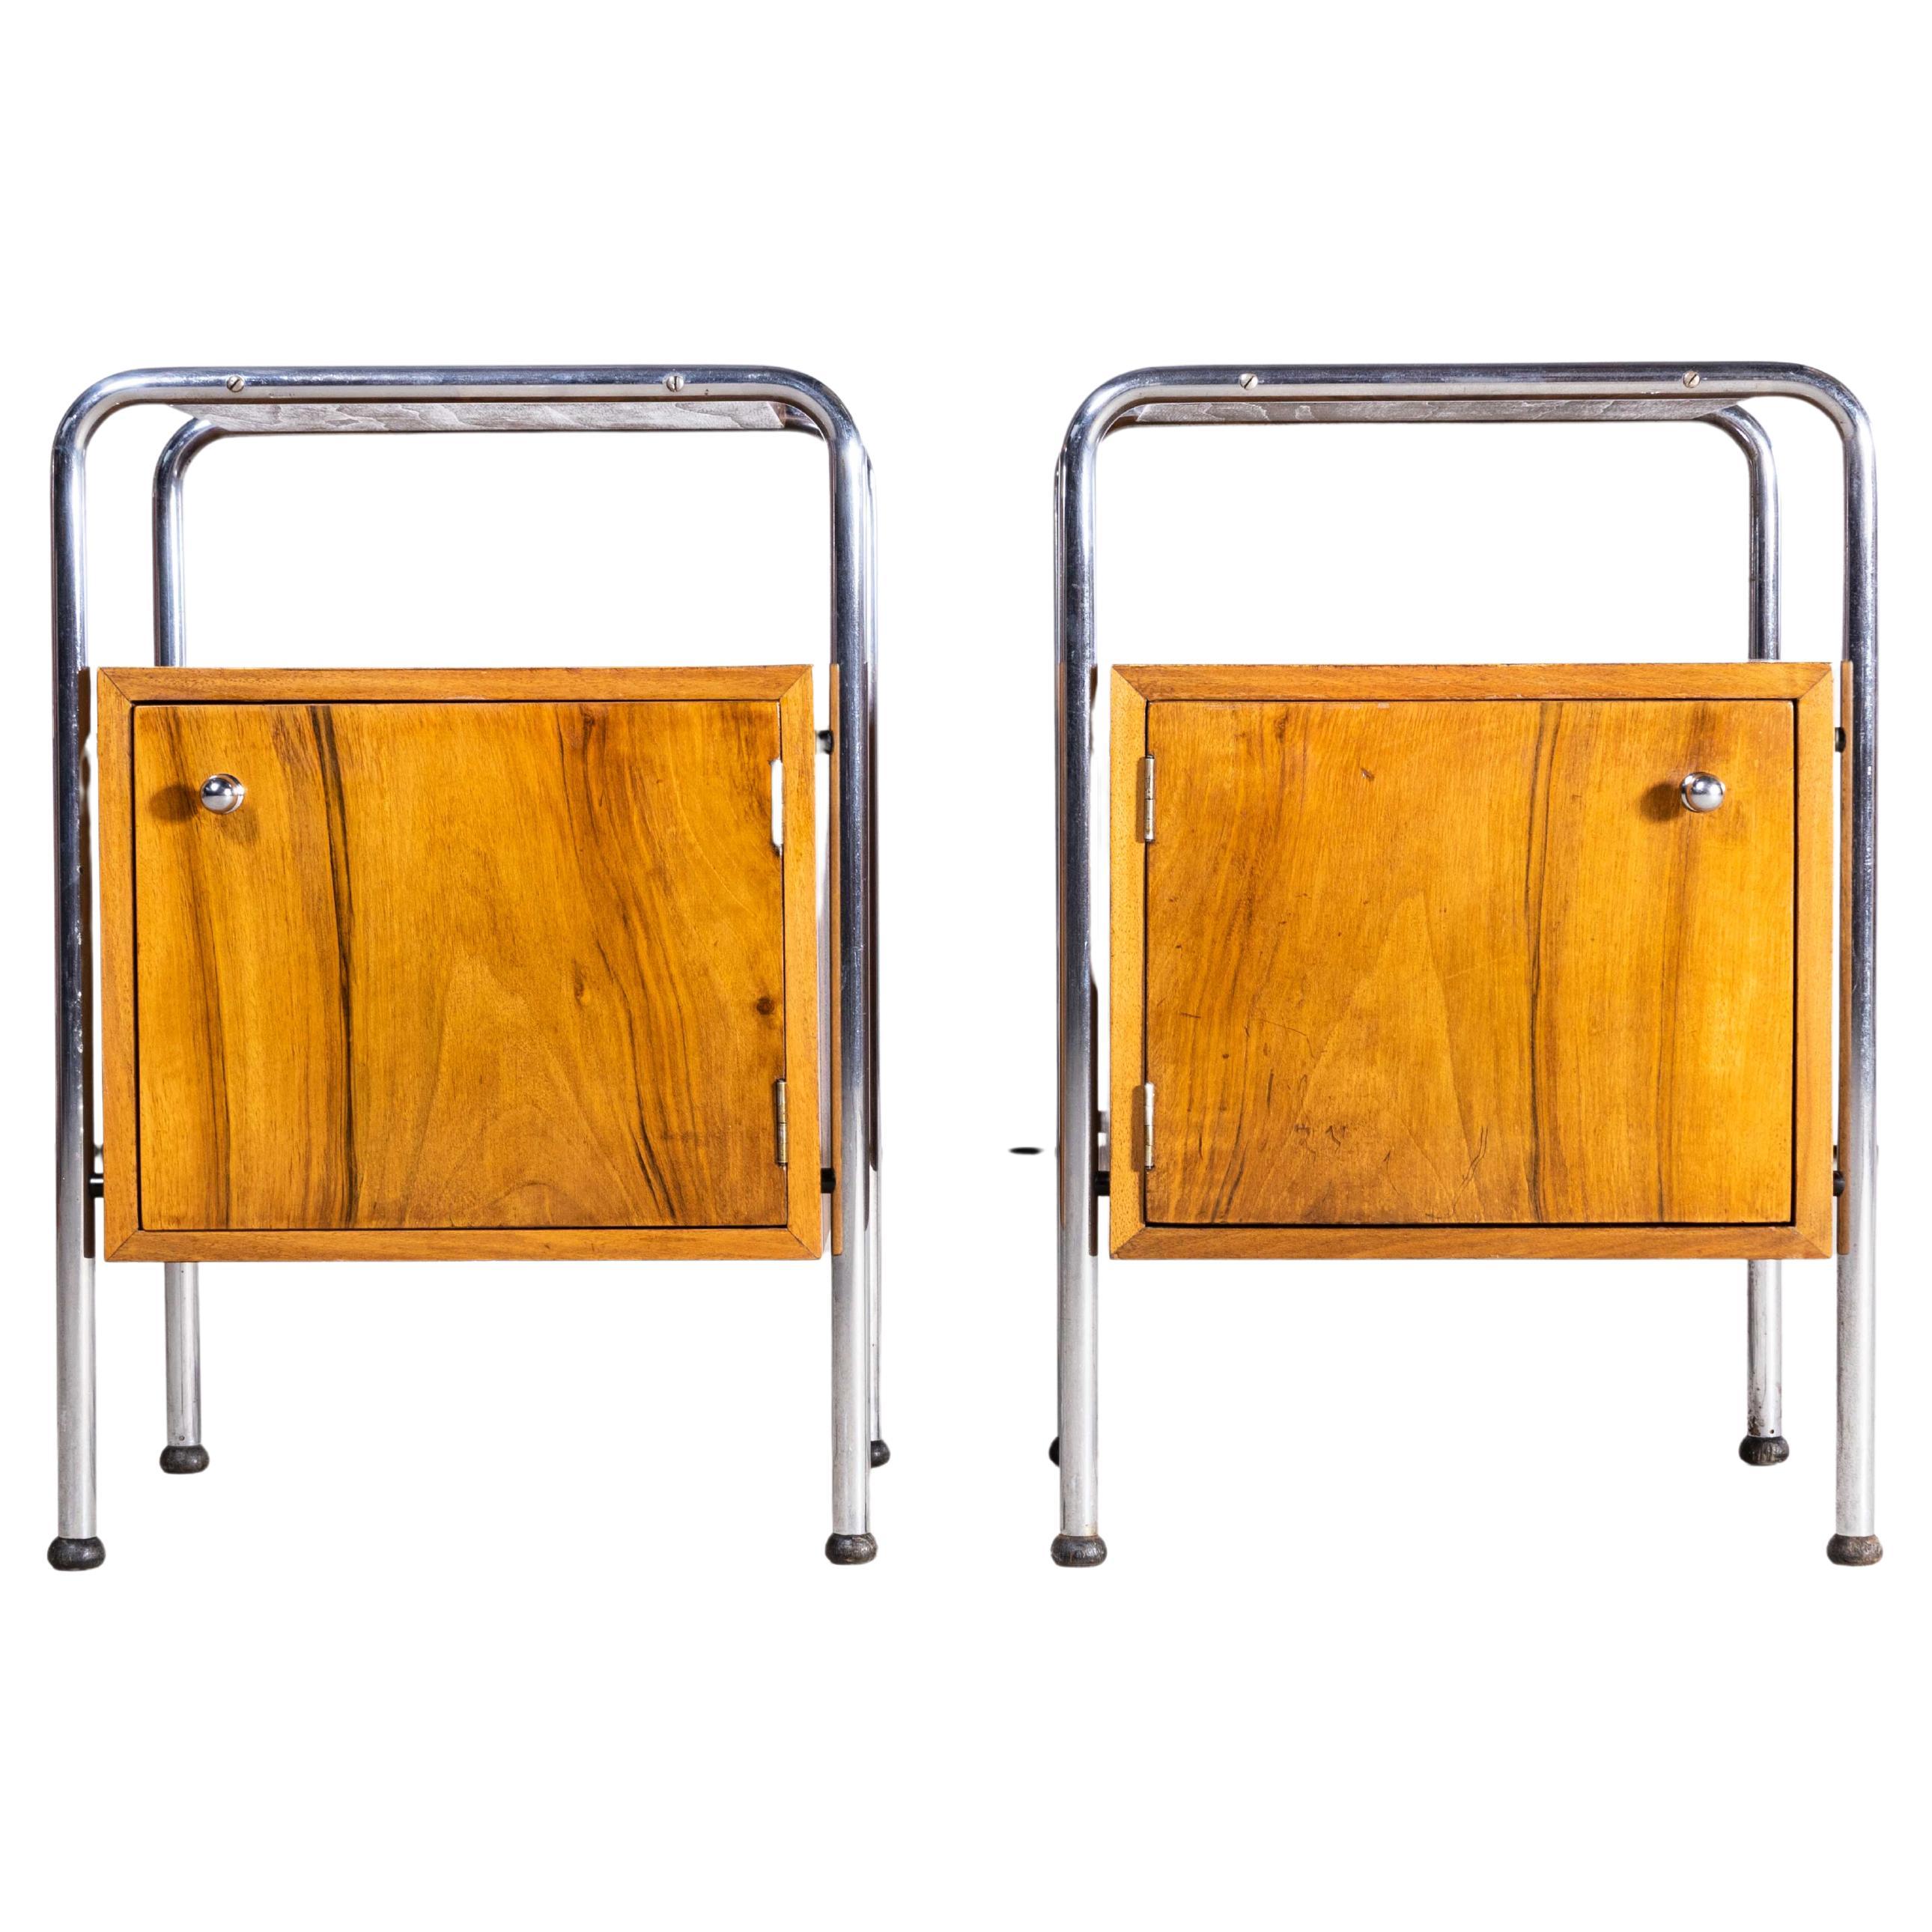 1960s Chrome and Birch Bedside Cabinets, Pair